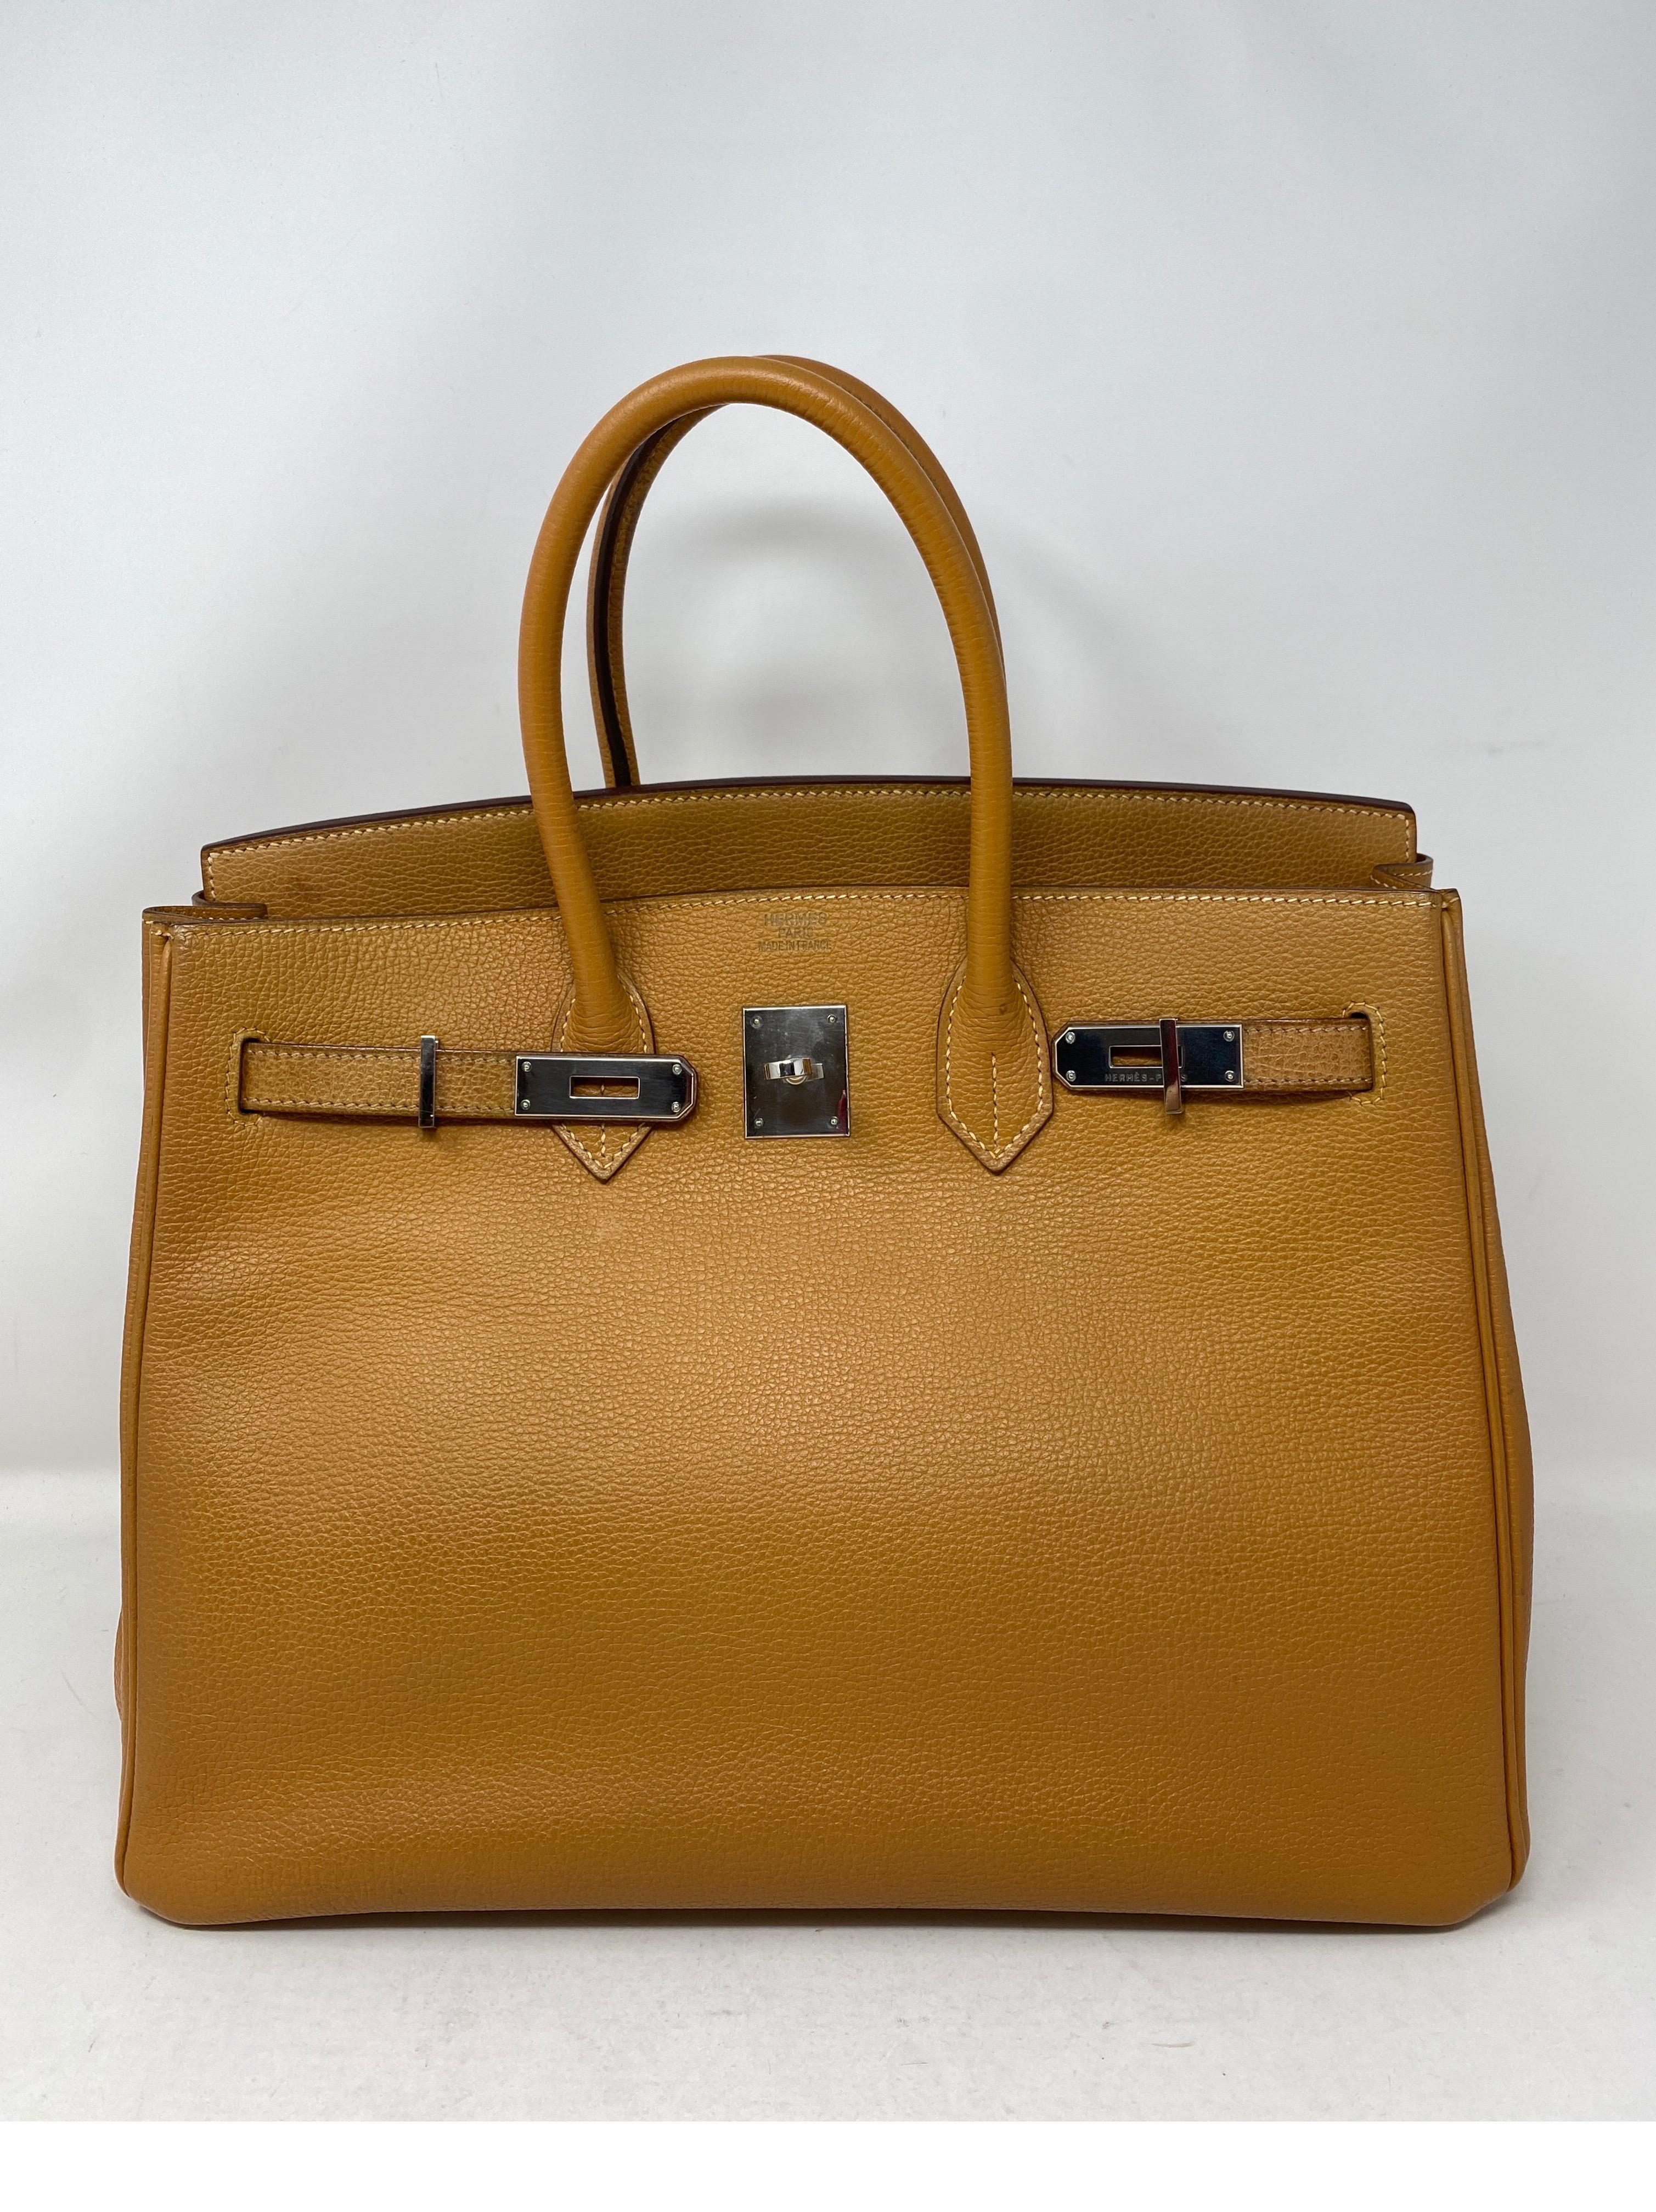 Hermes Birkin 35 Natural Bag. Tan neutral color. Vintage Birkin from 2006 in fair to good condition. Looks great for its age. Light wear throughout. Handles have a little wear. Please see all photos. 